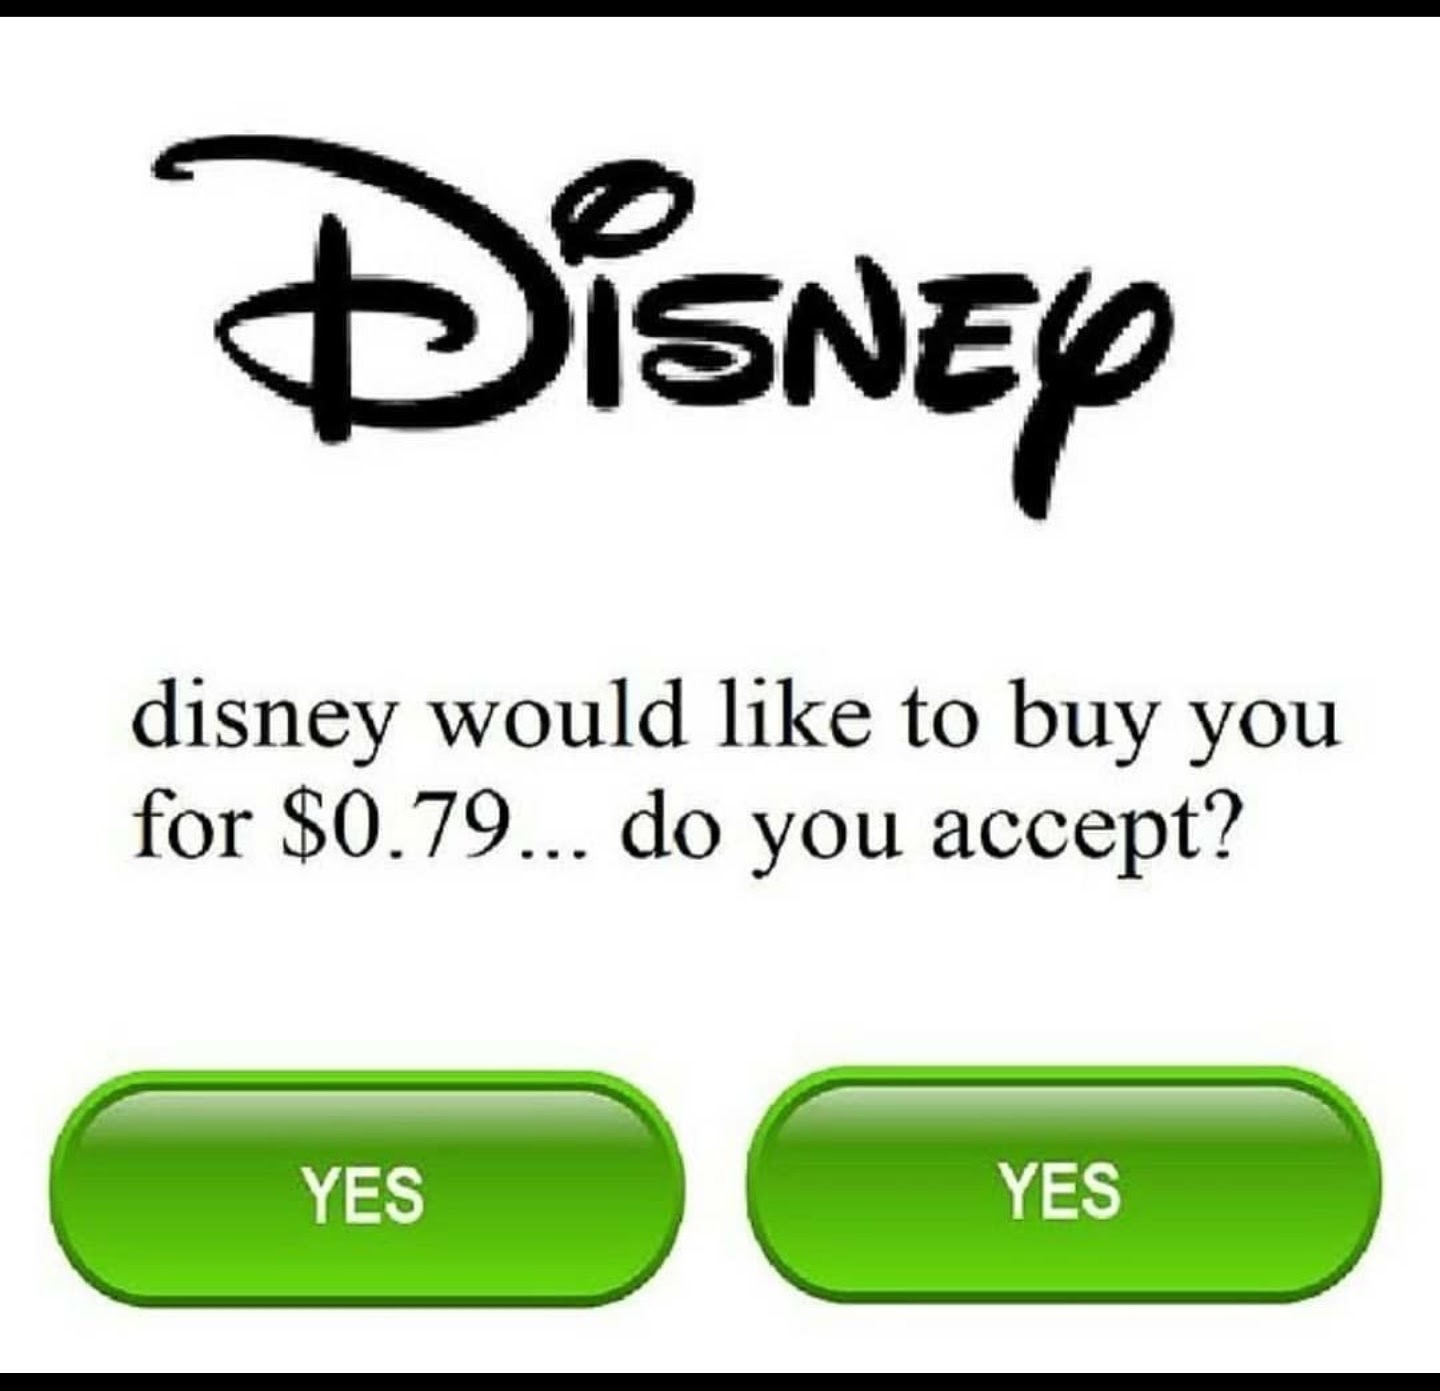 disney - Disney disney would to buy you for $0.79... do you accept? Yes Yes